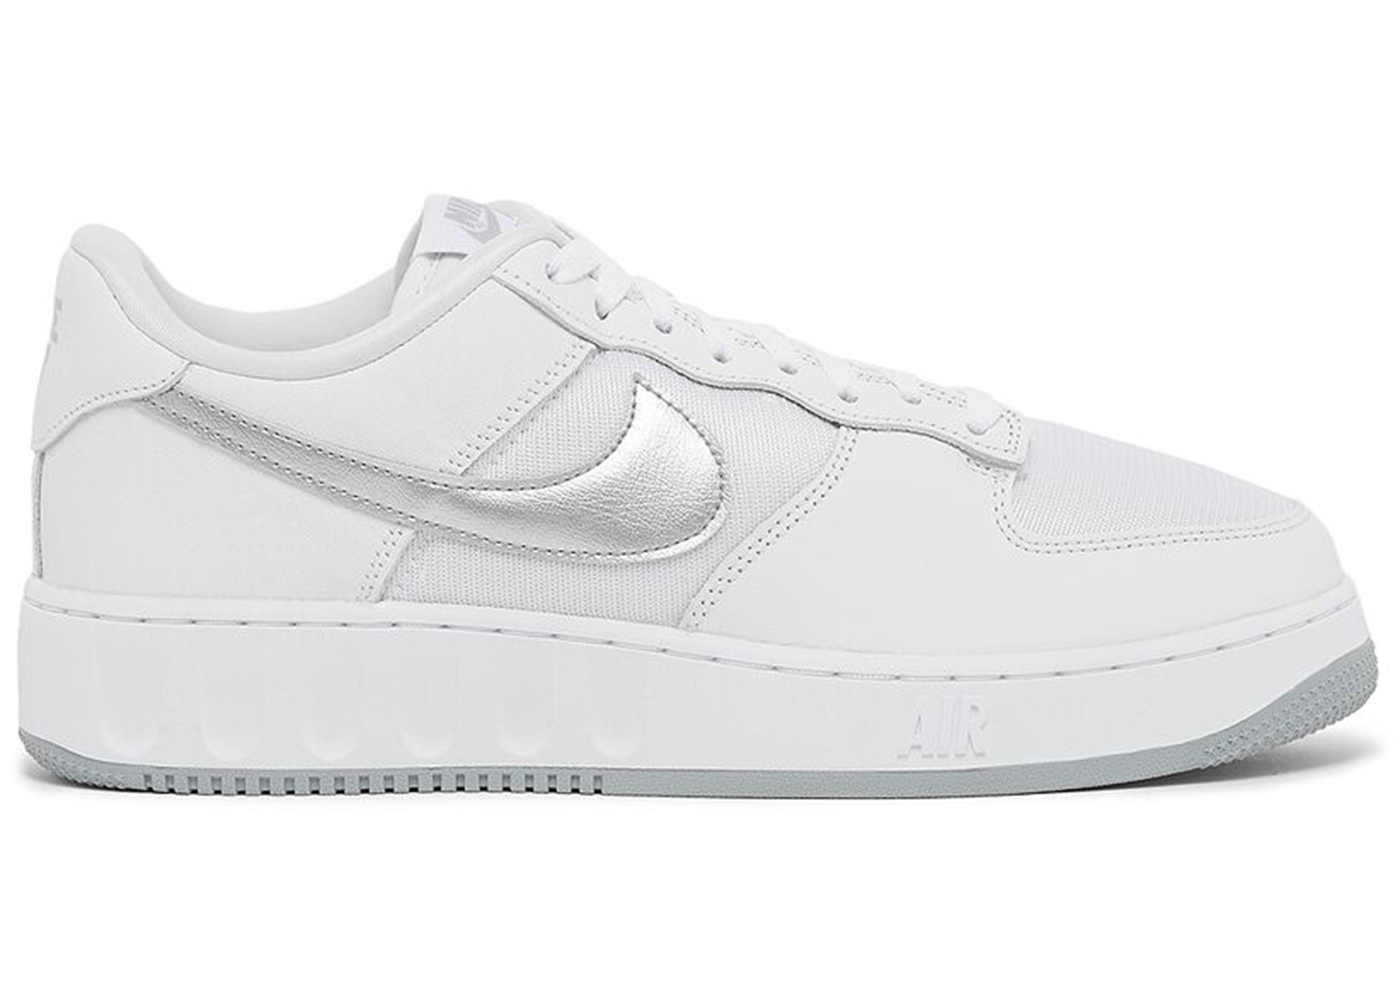 Nike Air Force 1 Low Unity White Racer Blue Uomo - DM2385-100 - IT